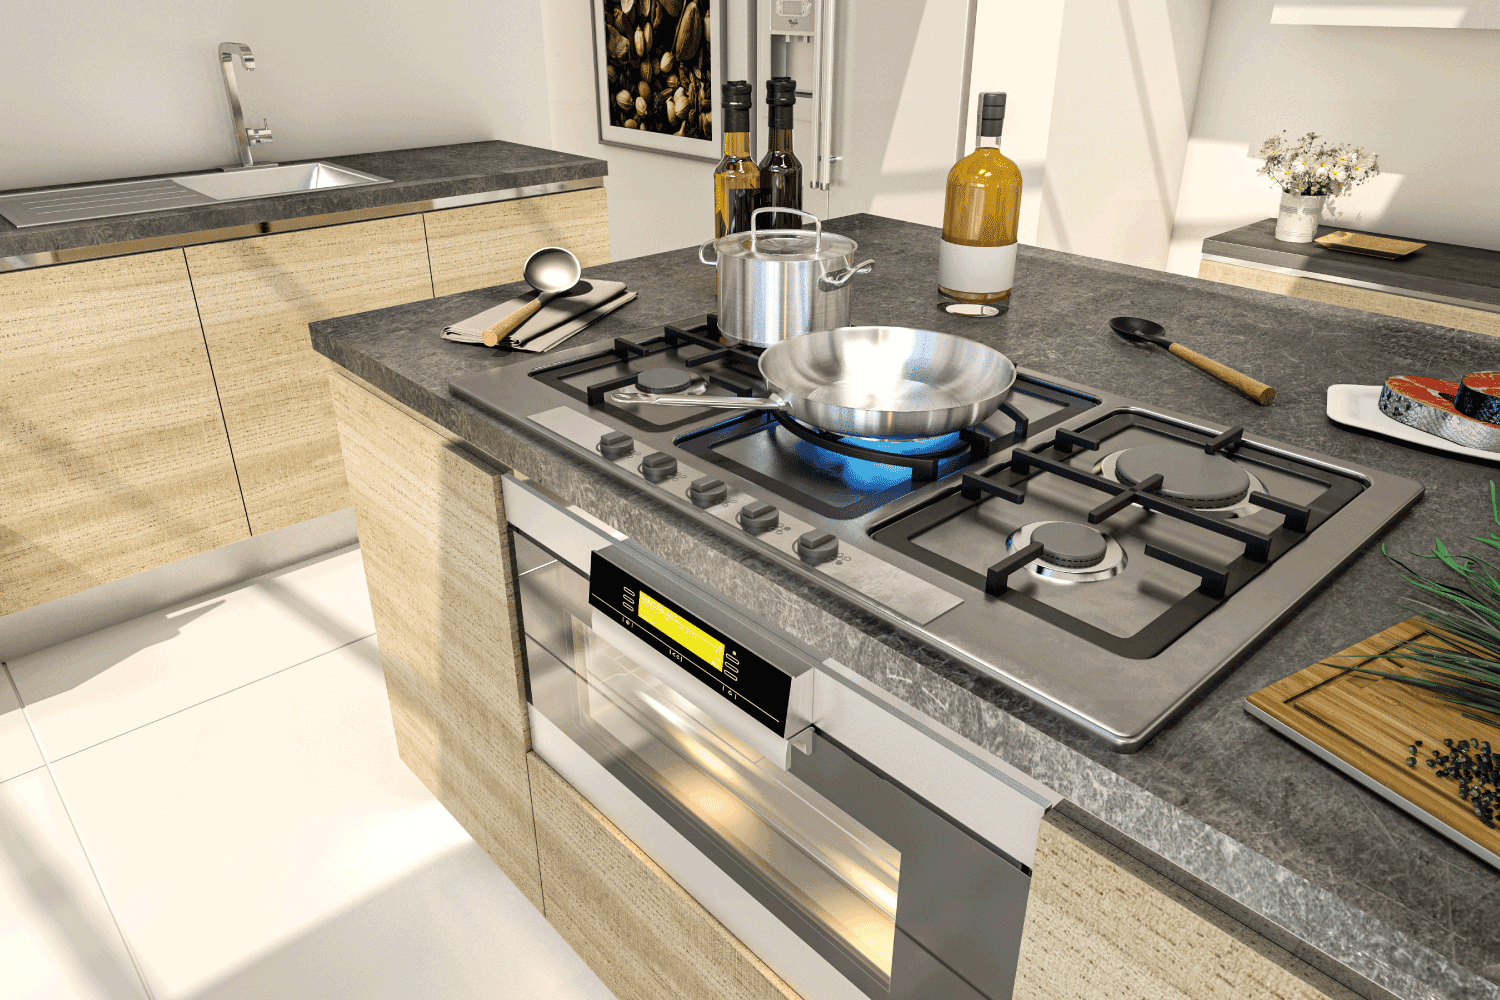 Cooking area of a modern stylish kitchen with skillet on top of open stove